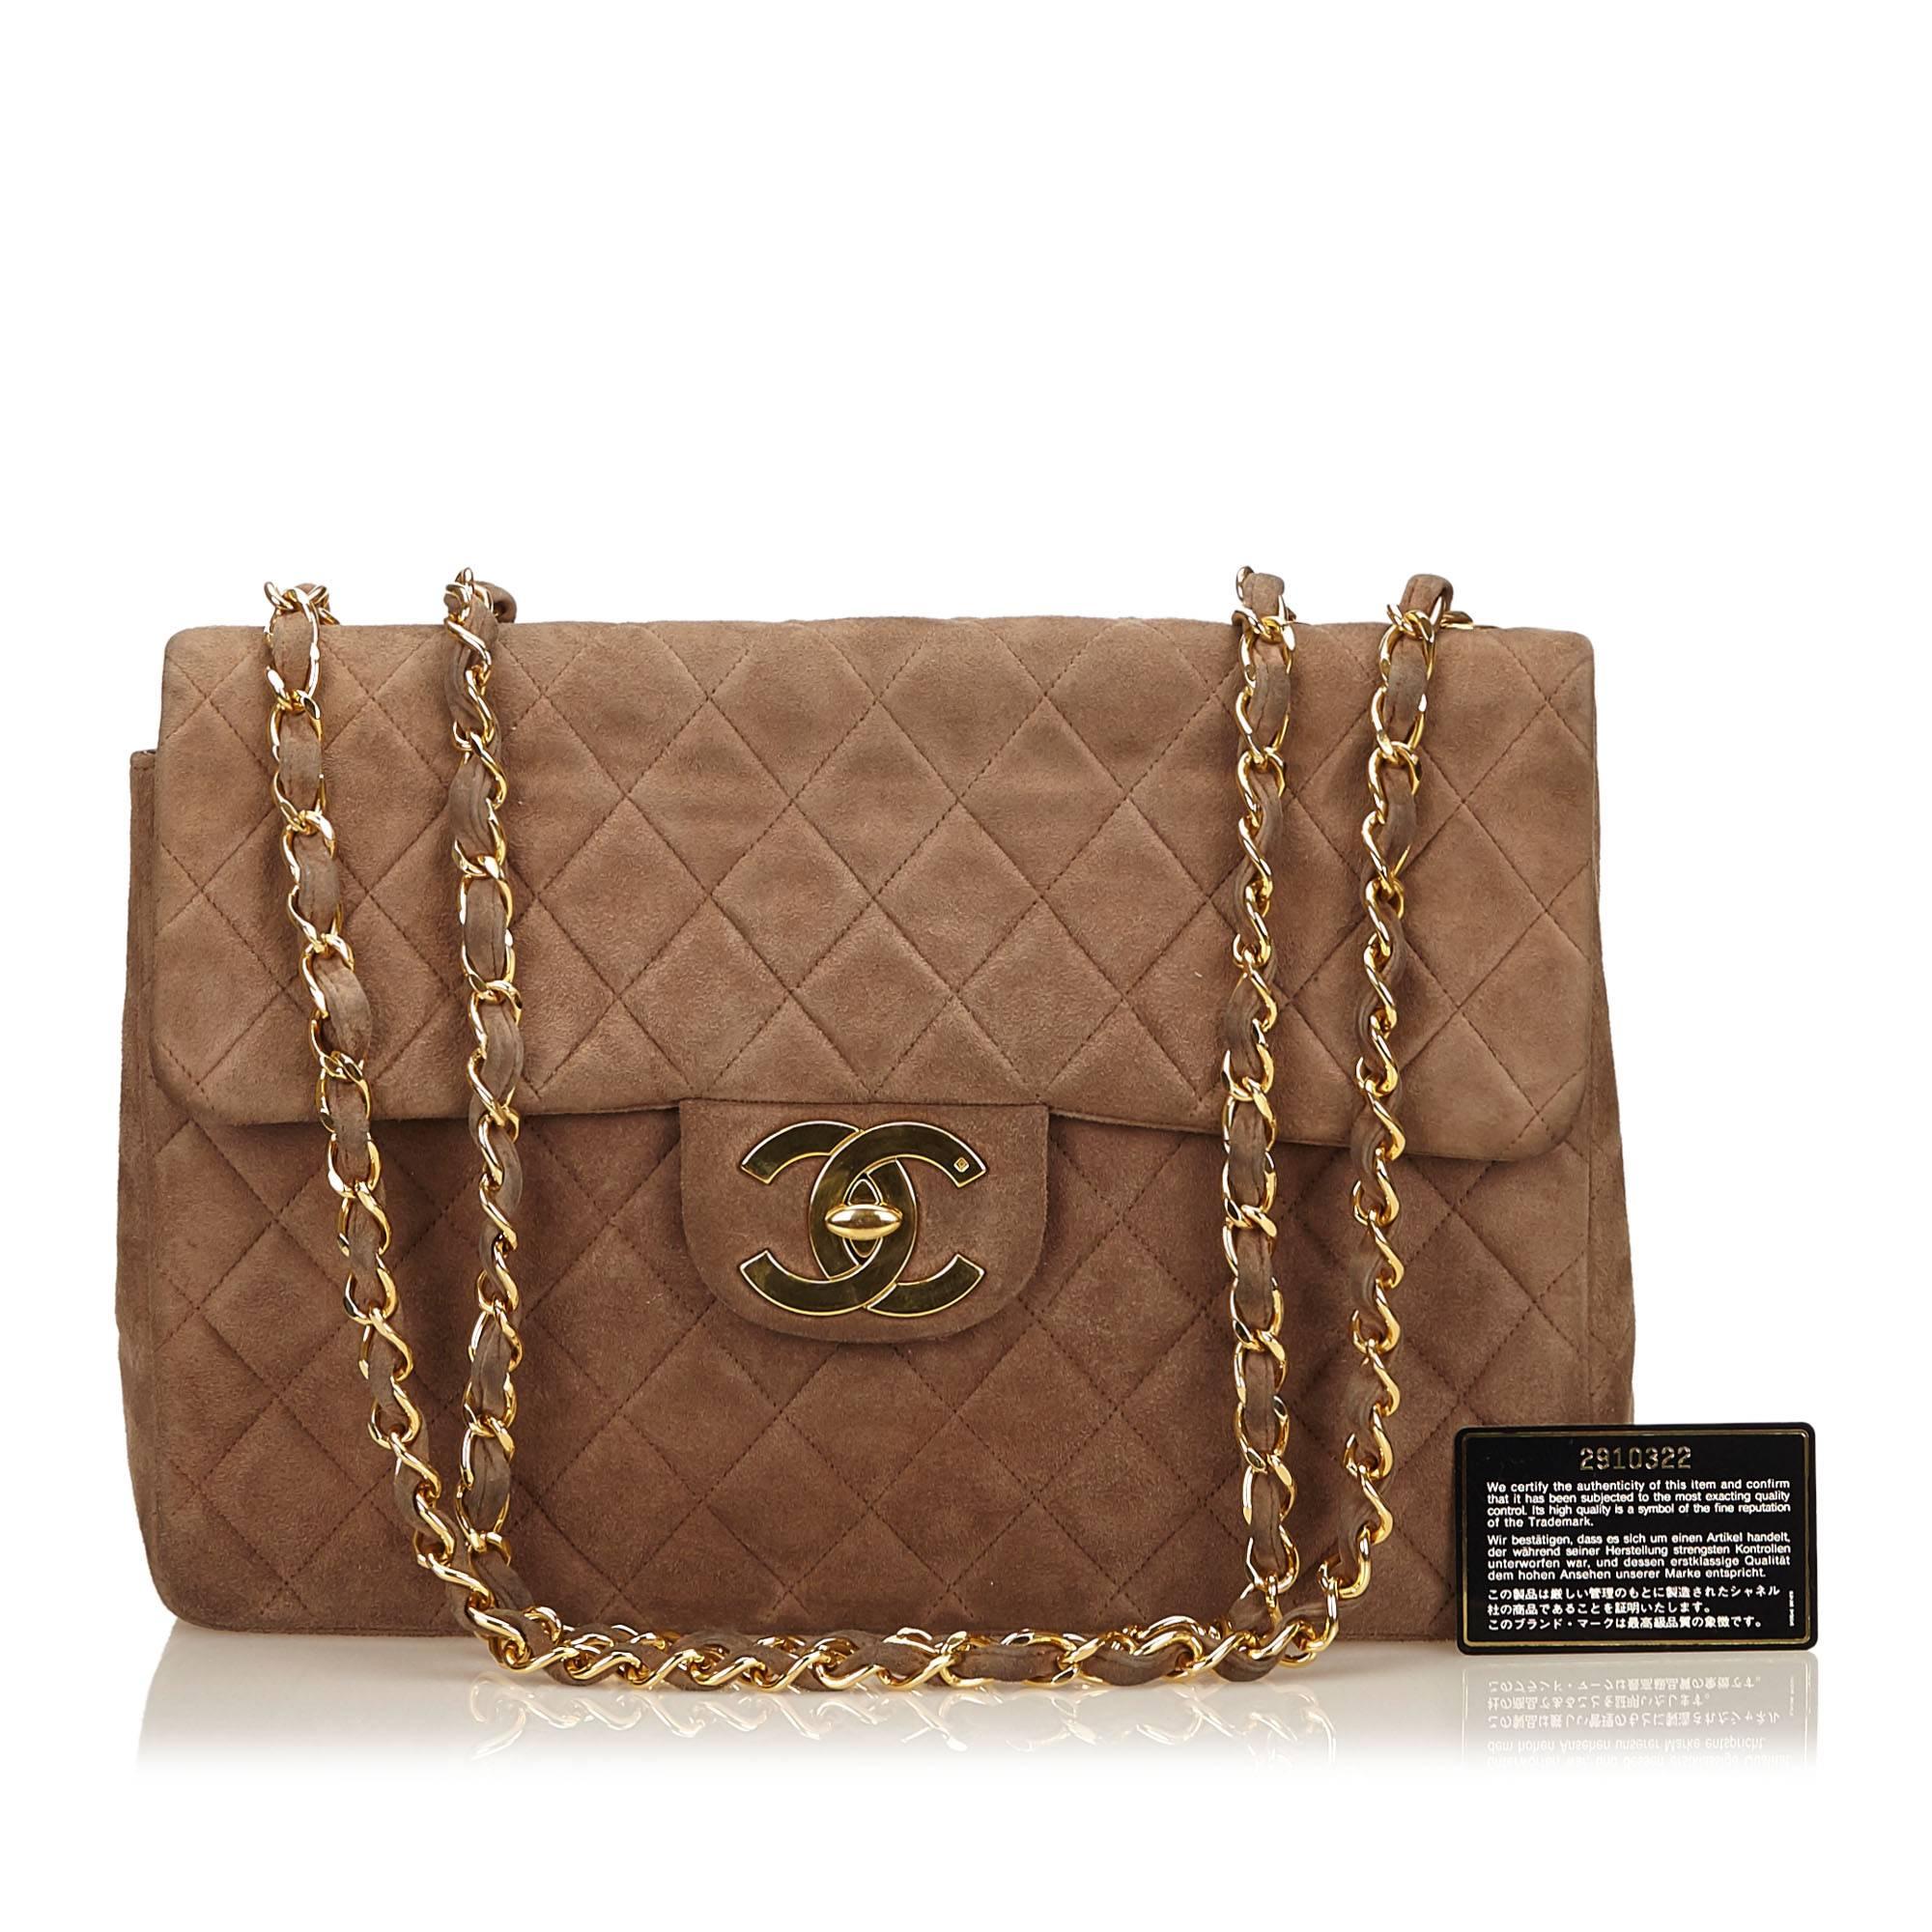 Women's Chanel Brown Quilted Suede Maxi Shoulder Flap Bag